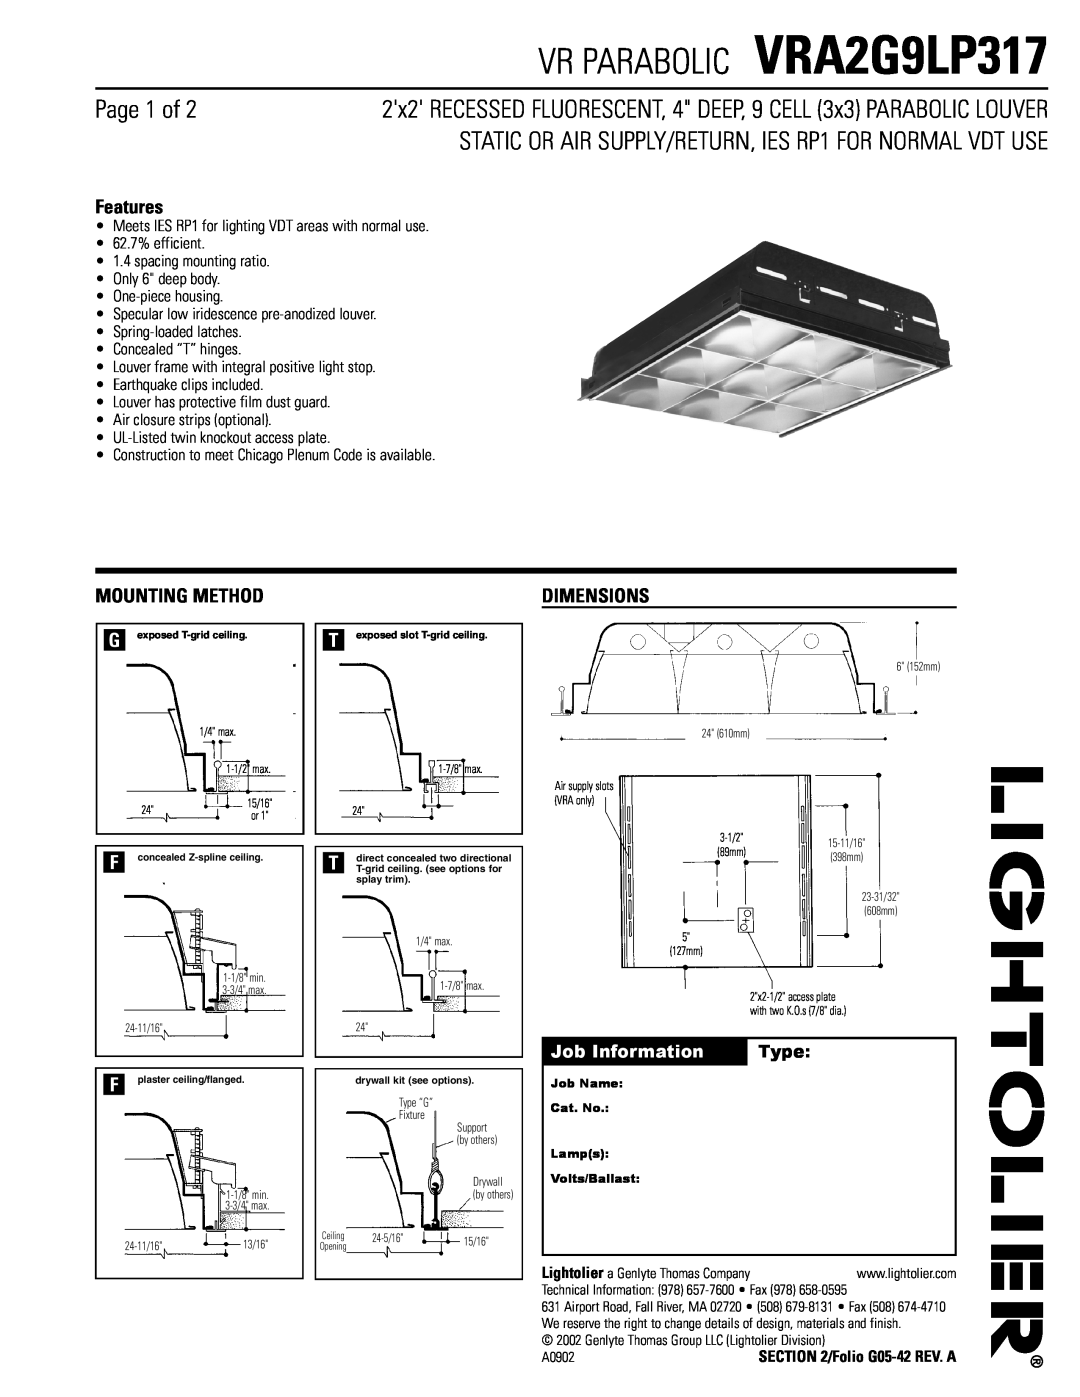 Lightolier dimensions VR PARABOLIC VRA2G9LP317, Page 1 of, Features, Mounting Method, Dimensions, Job Information, Type 